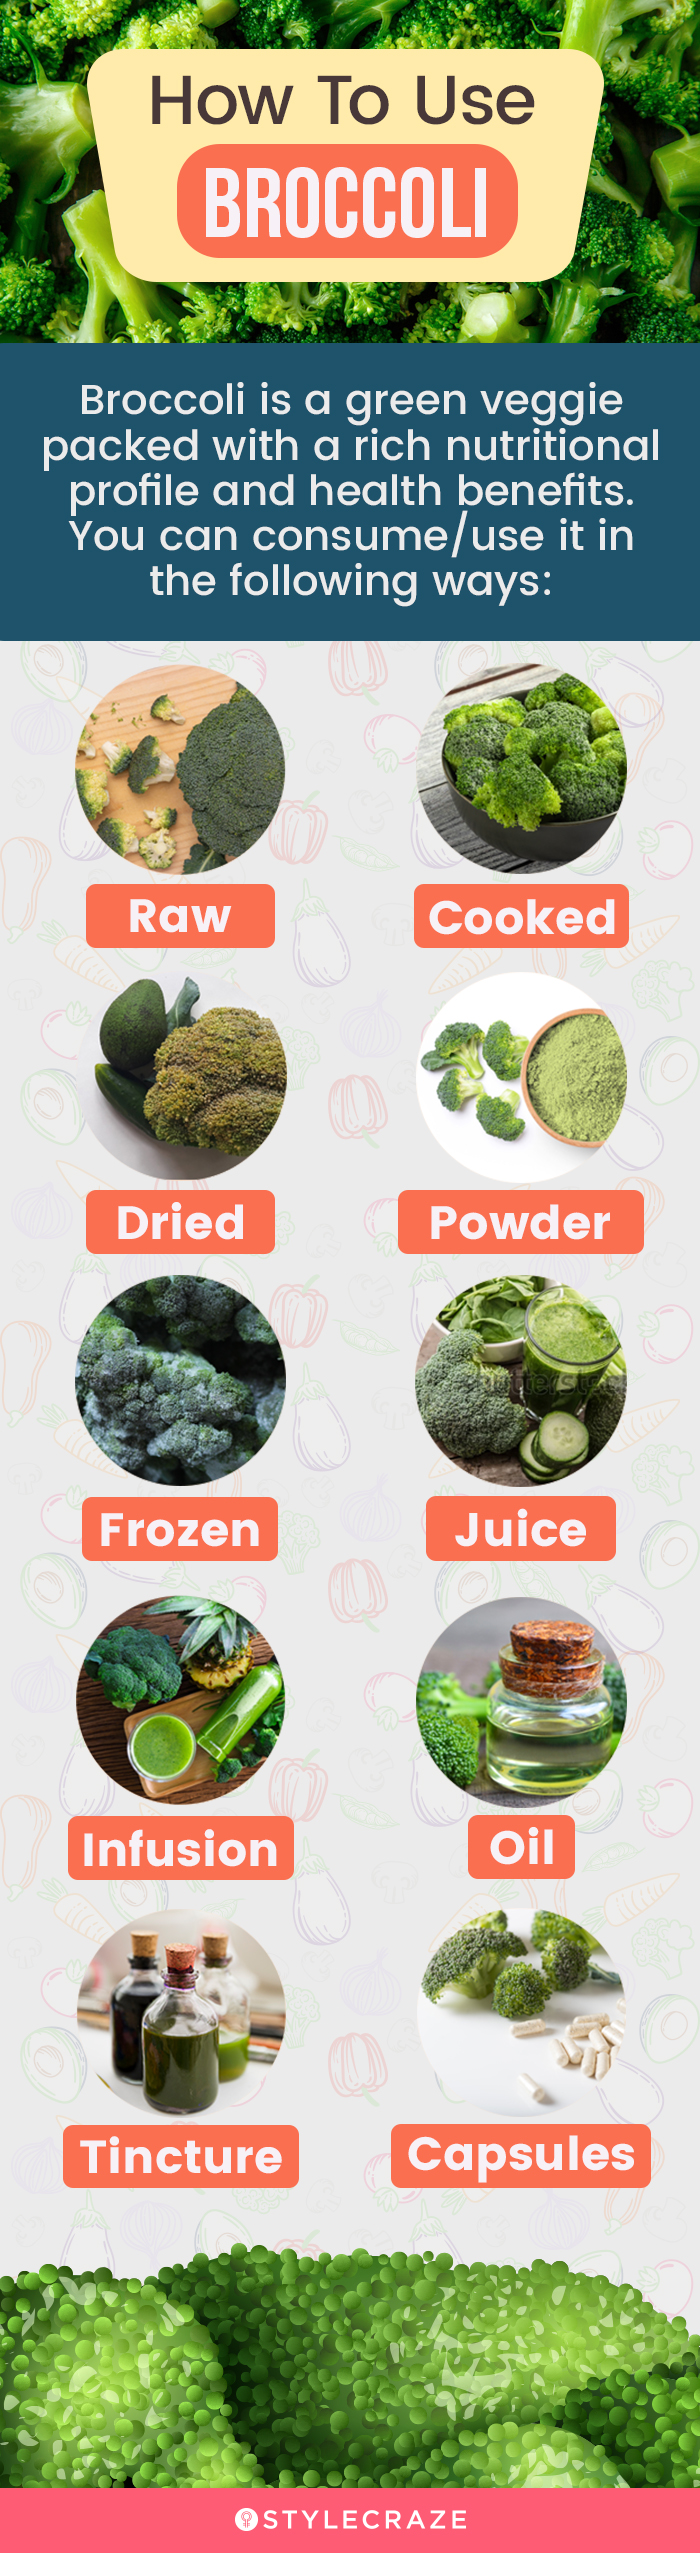 how to use broccoli (infographic)